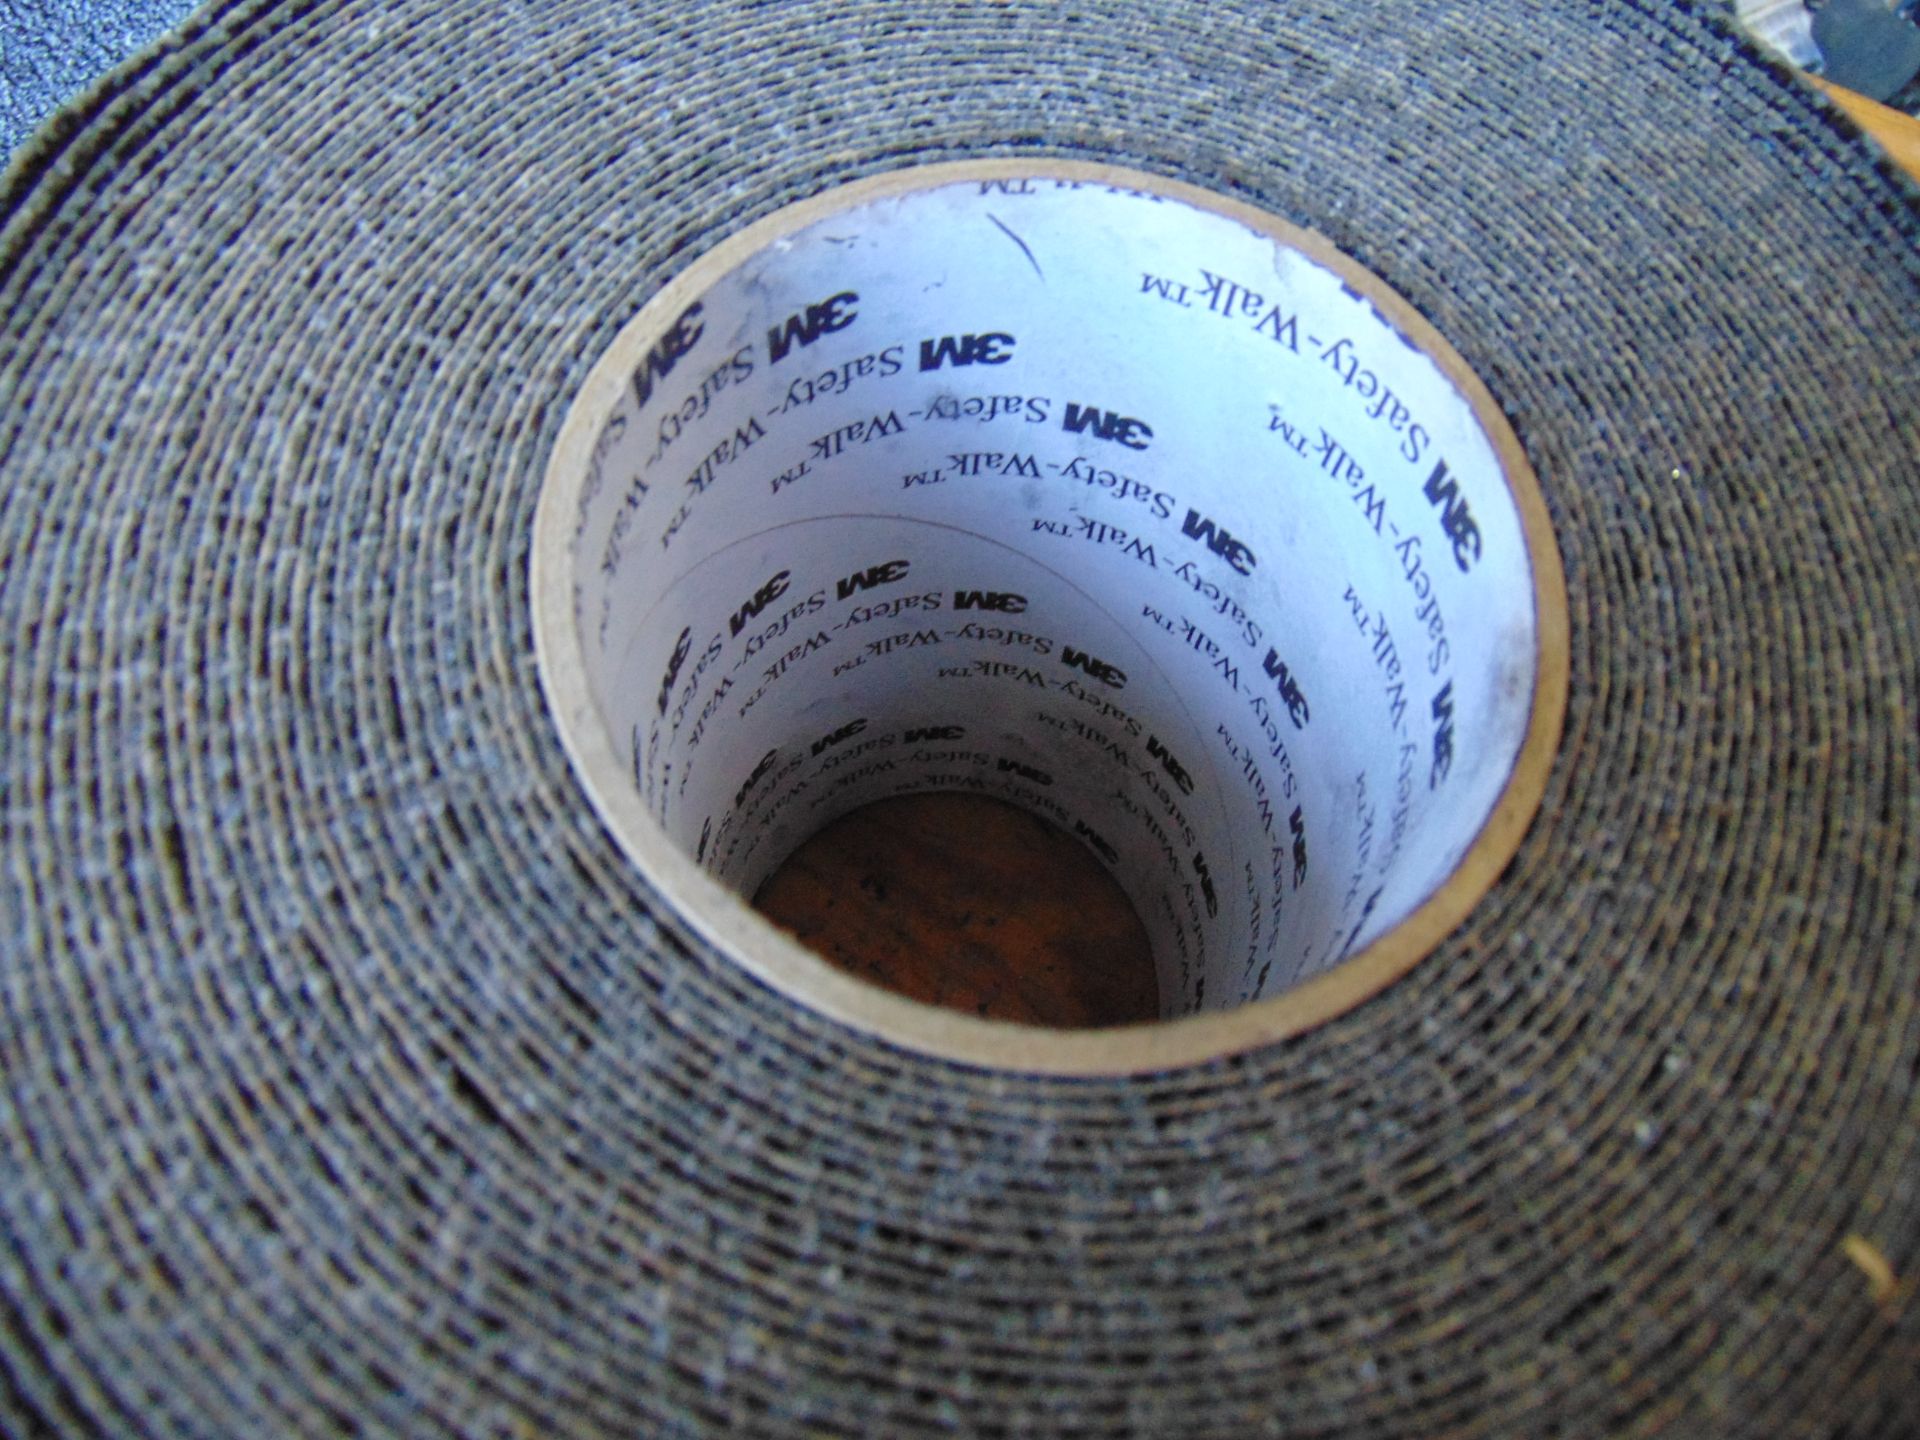 1 x Large Roll of 3M Safety Walk Non Slip Walk Way Tape, MoD Reserve Stock Unissued - Image 6 of 6